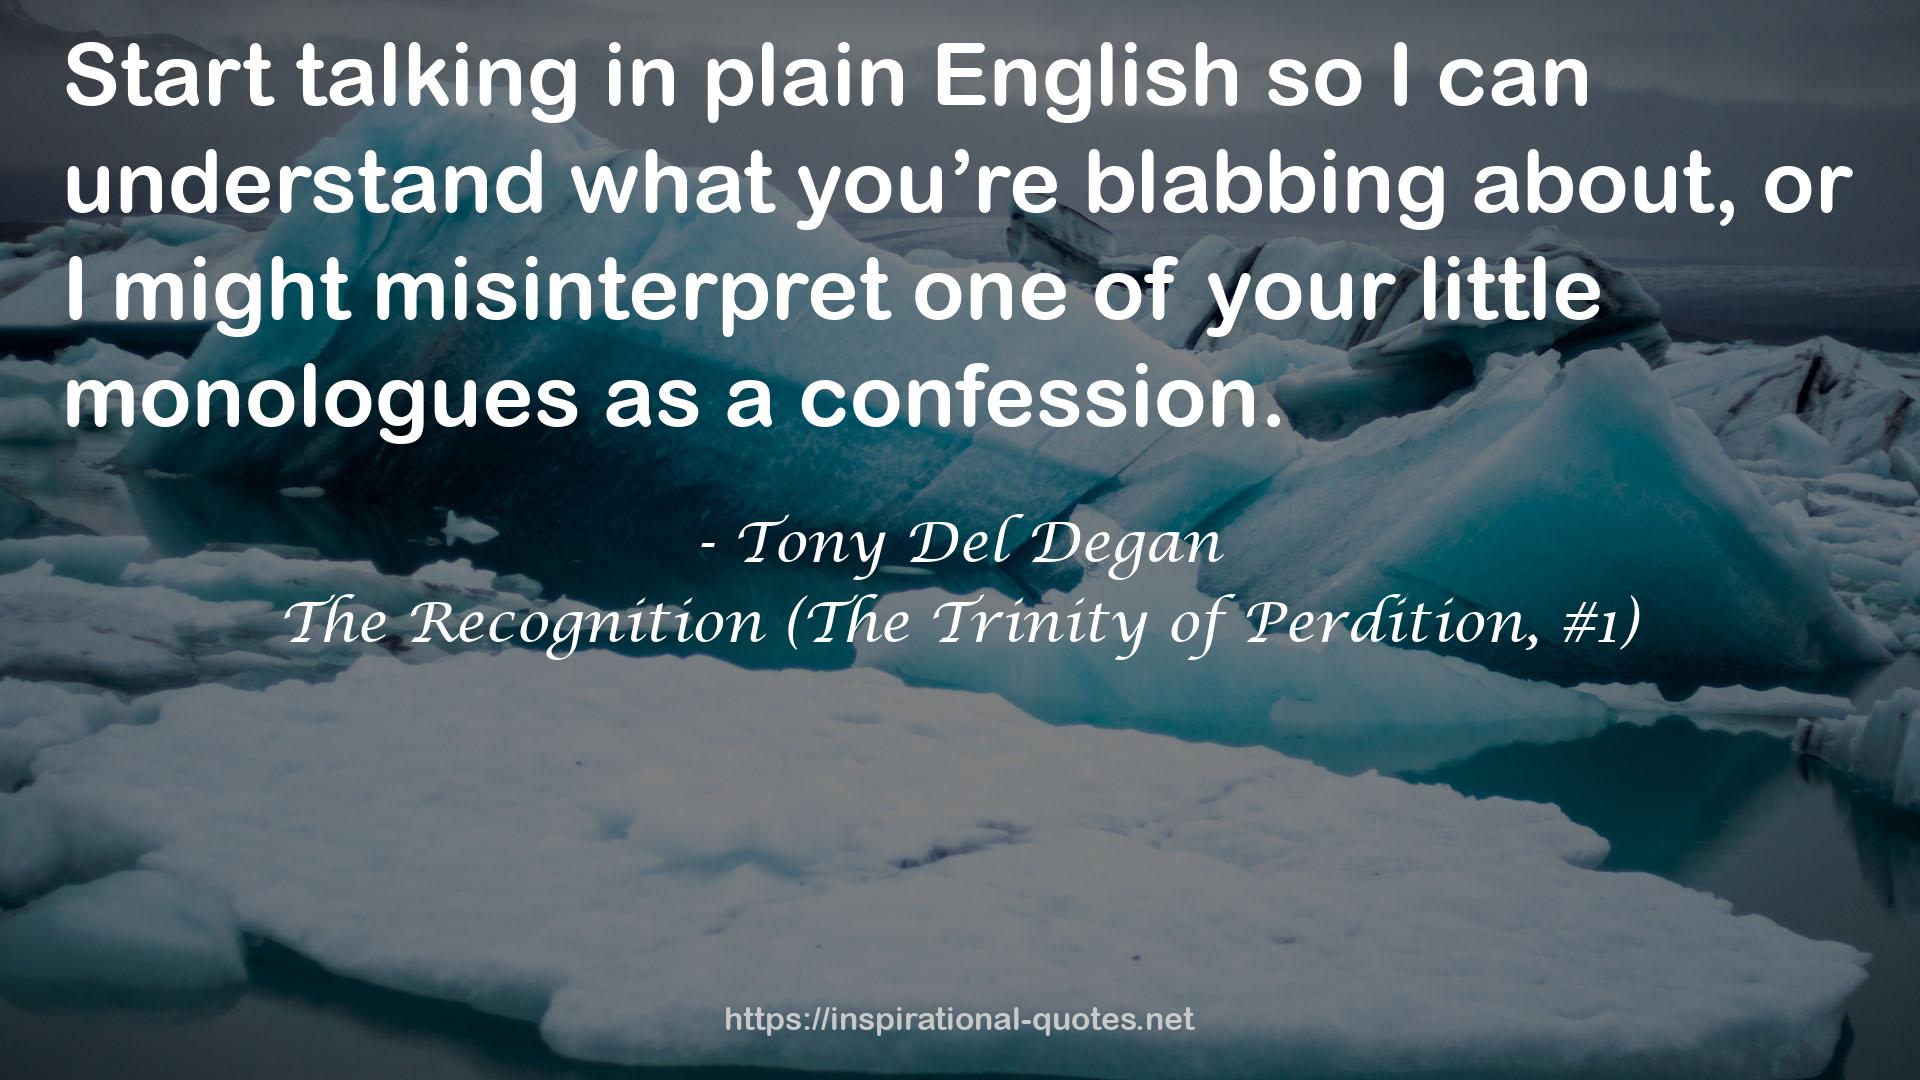 The Recognition (The Trinity of Perdition, #1) QUOTES